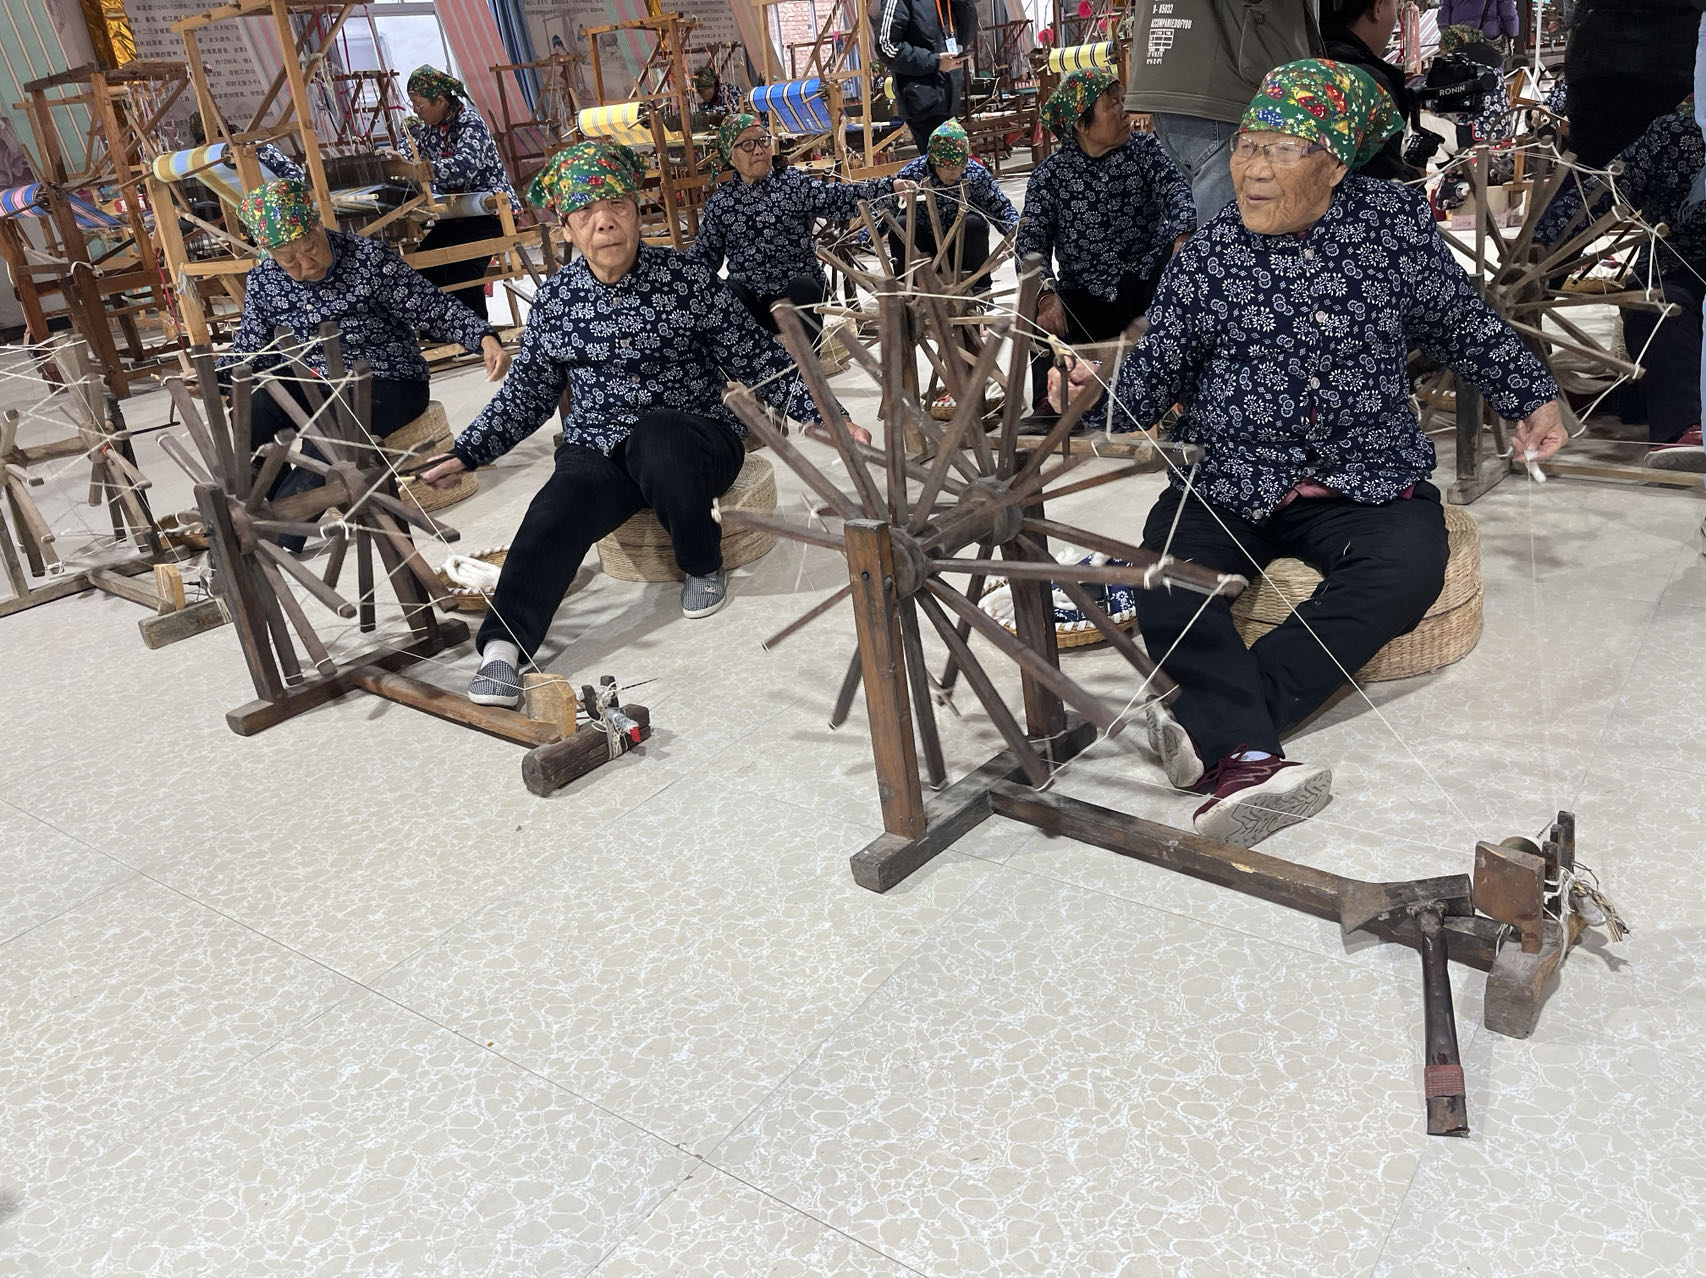 Women spin cotton to be made into fabric at a cloth company in Yongji, Shanxi on November 16, 2023. /CGTN